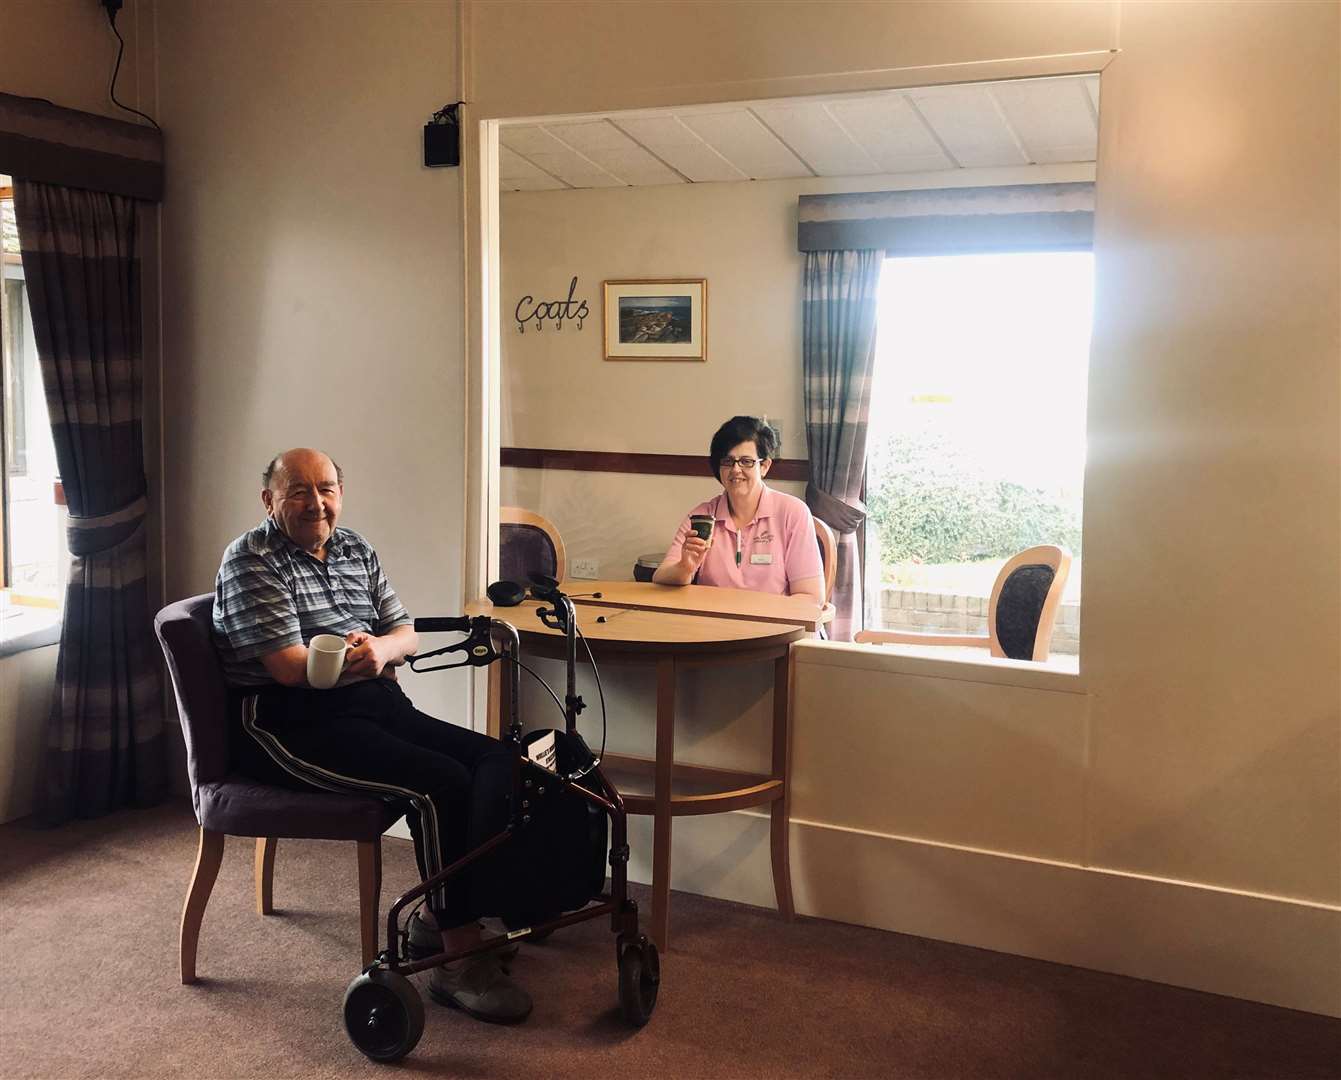 Seaview House resident Willie Cuthbertson and activities co-ordinator Mandy Wilson demonstrating the new visiting suite.